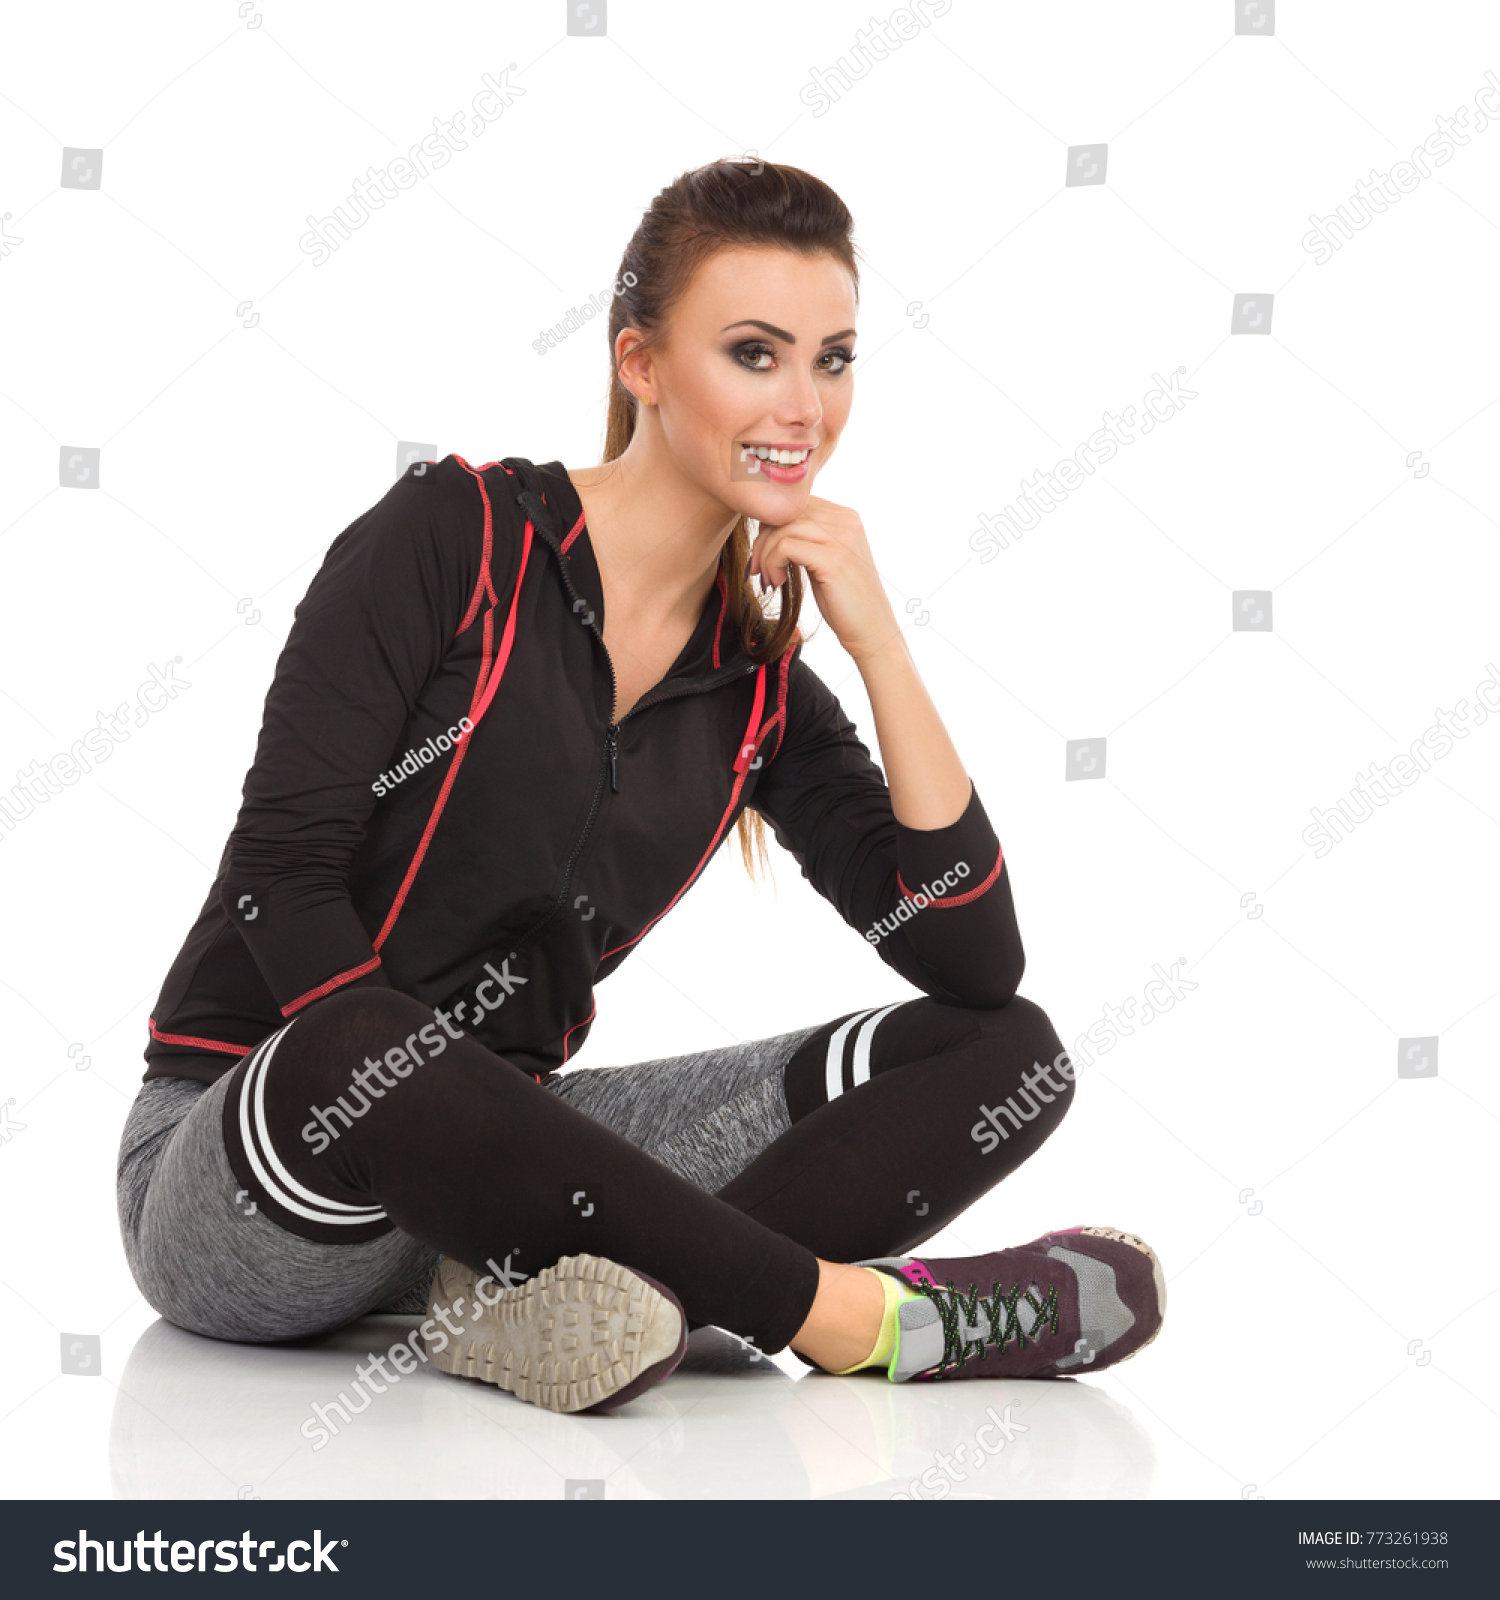 Beautiful young woman in fitness clothes is sitting on floor legs crossed, looking at camera and smiling. Full length studio shot isolated on white. #773261938